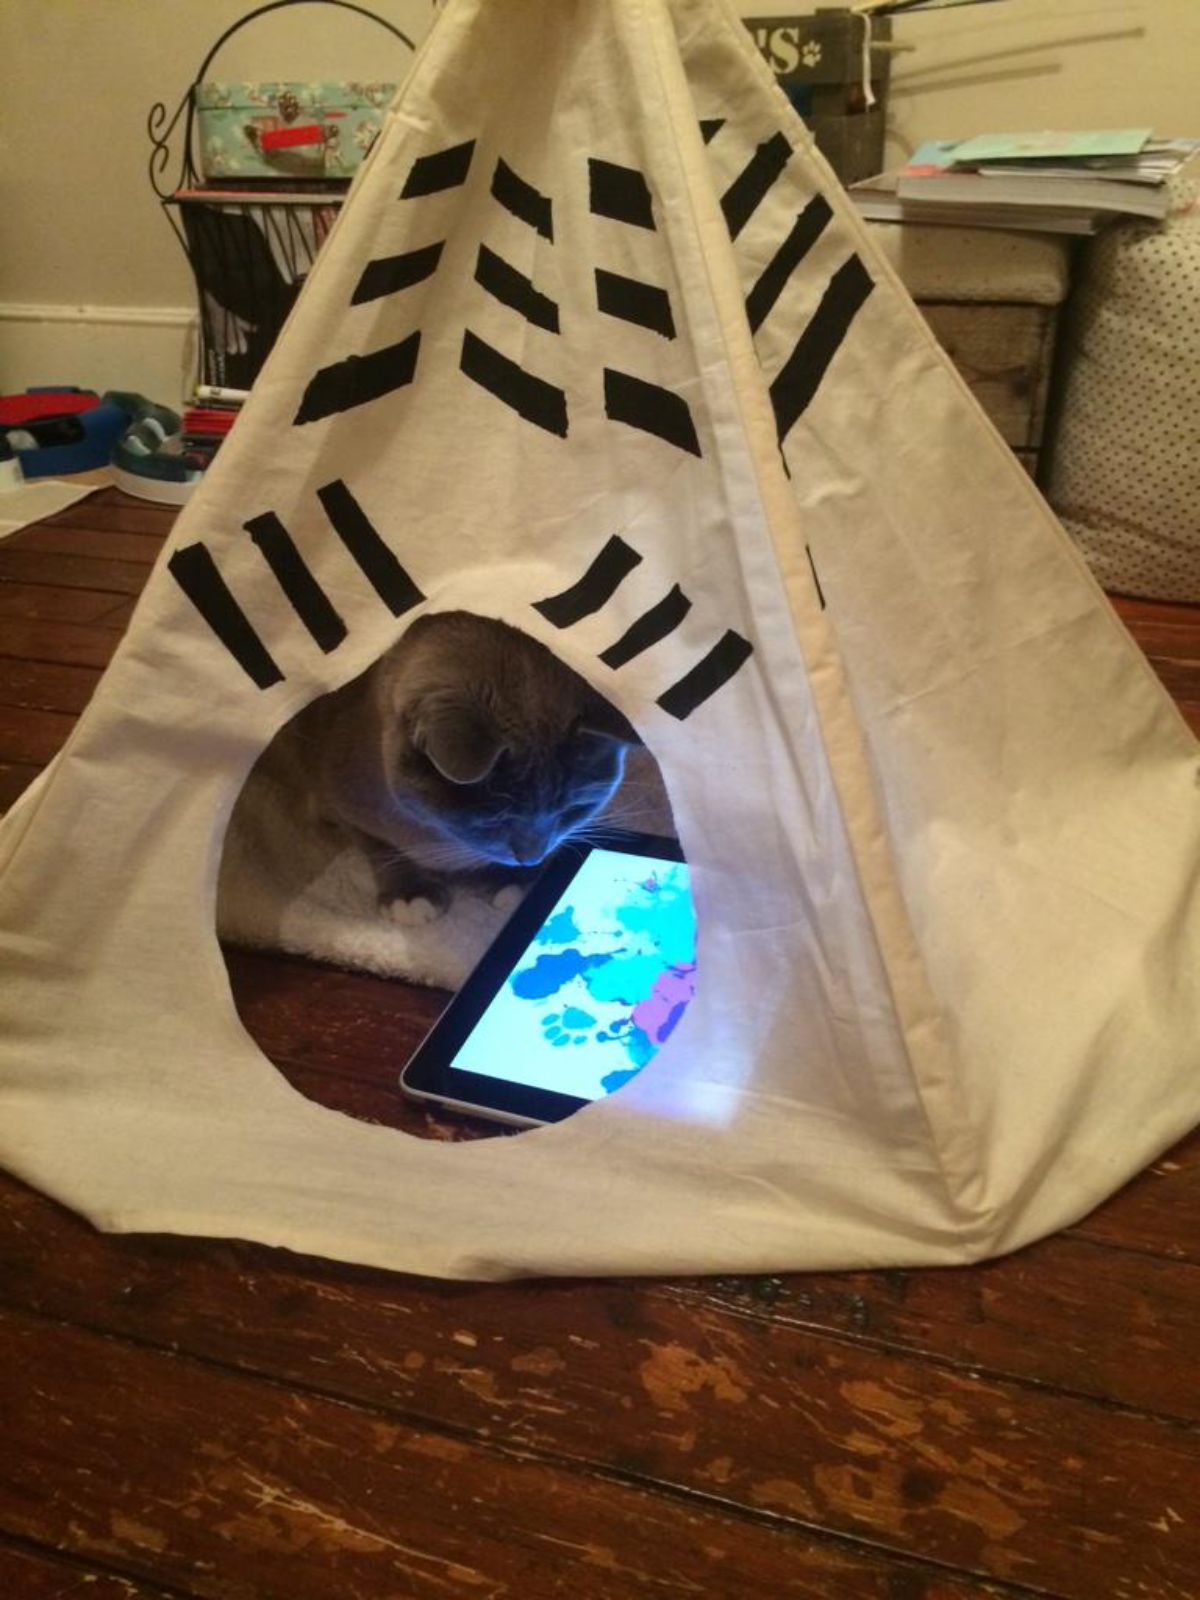 grey cat inside a white and black yurt watching something on an ipad